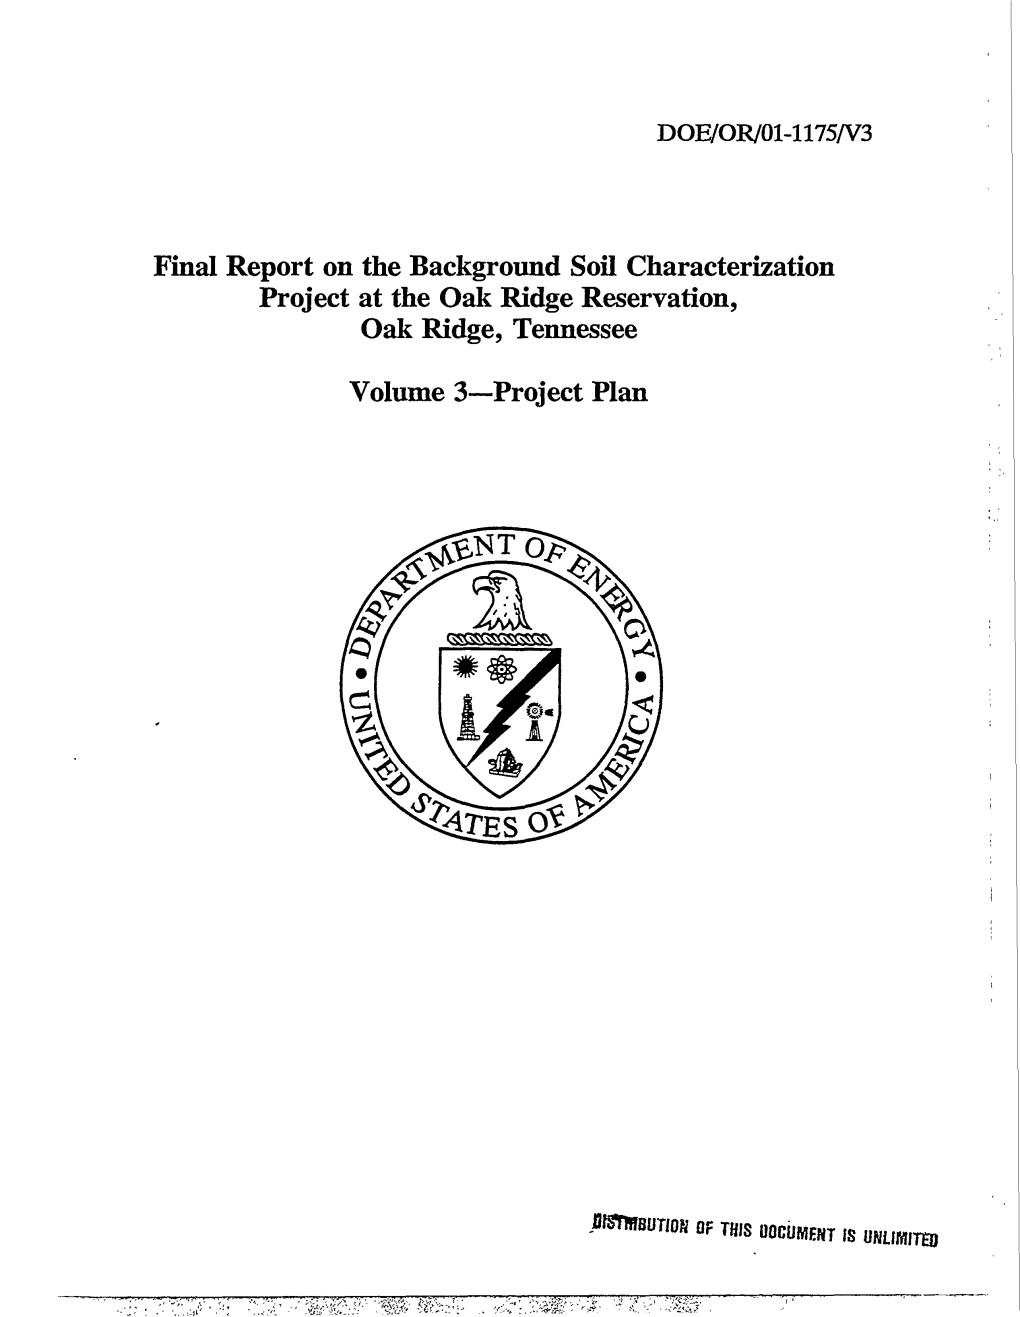 Final Report on the Background Soil Characterization Project at the Oak Ridge Reservation, Oak Ridge, Tennessee Volume 3—Proje